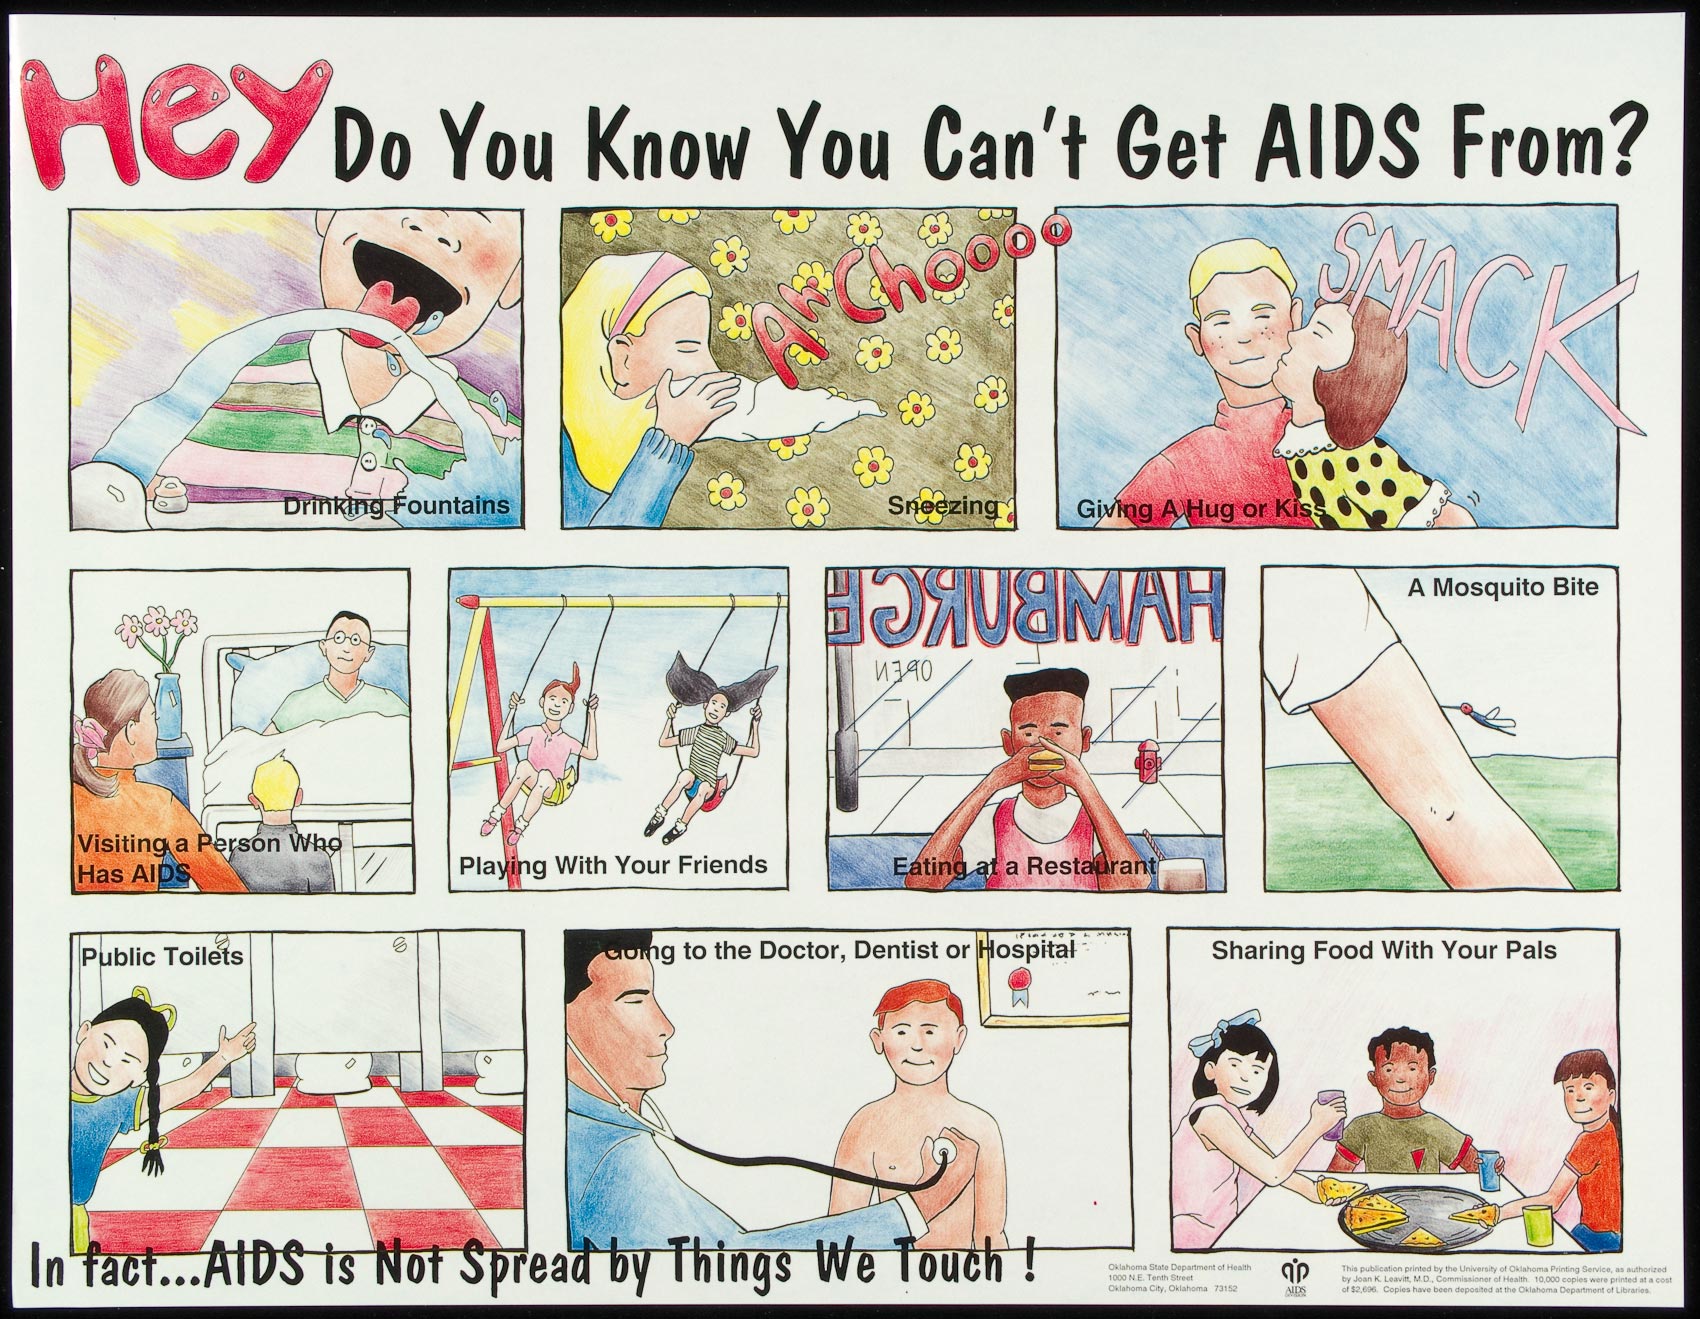 Hey do you know you can't get AIDS from? | AIDS Education ...